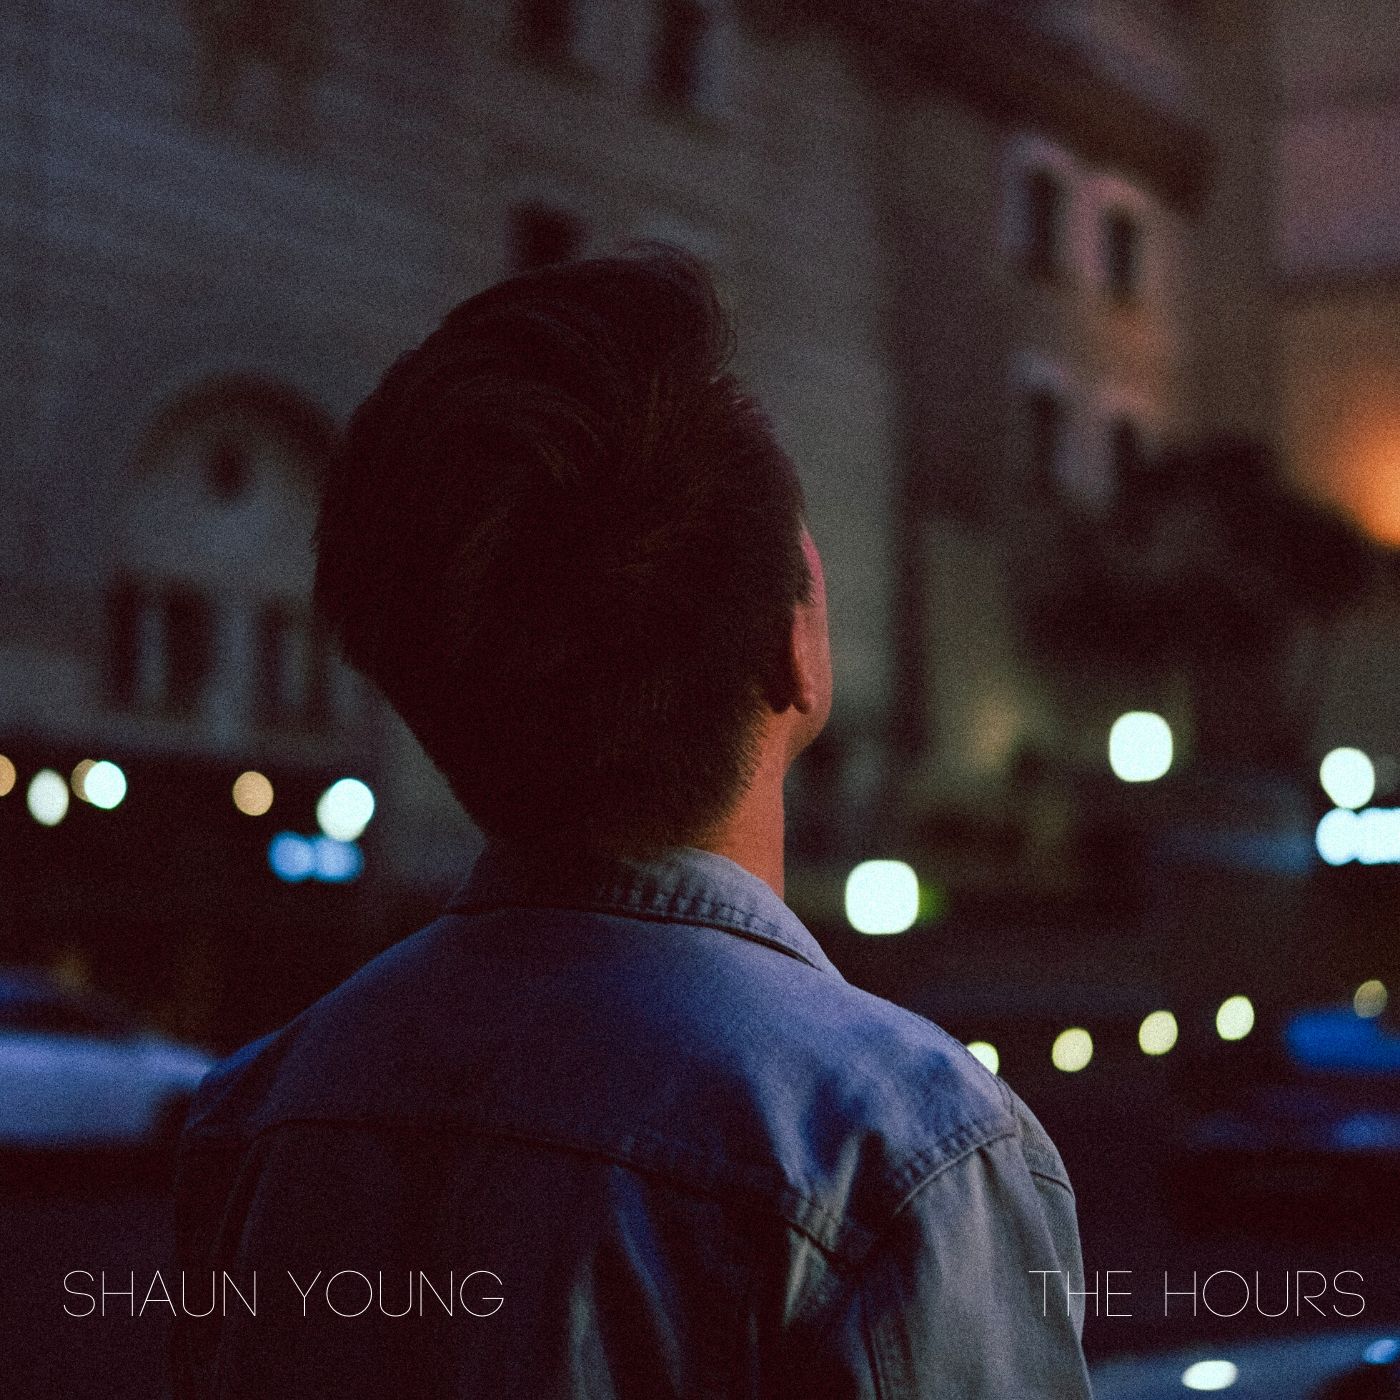 INDIE POP FIND: Shaun Young’ The Hours is pure pop songwriting at its finest. Listen to it on the playlist